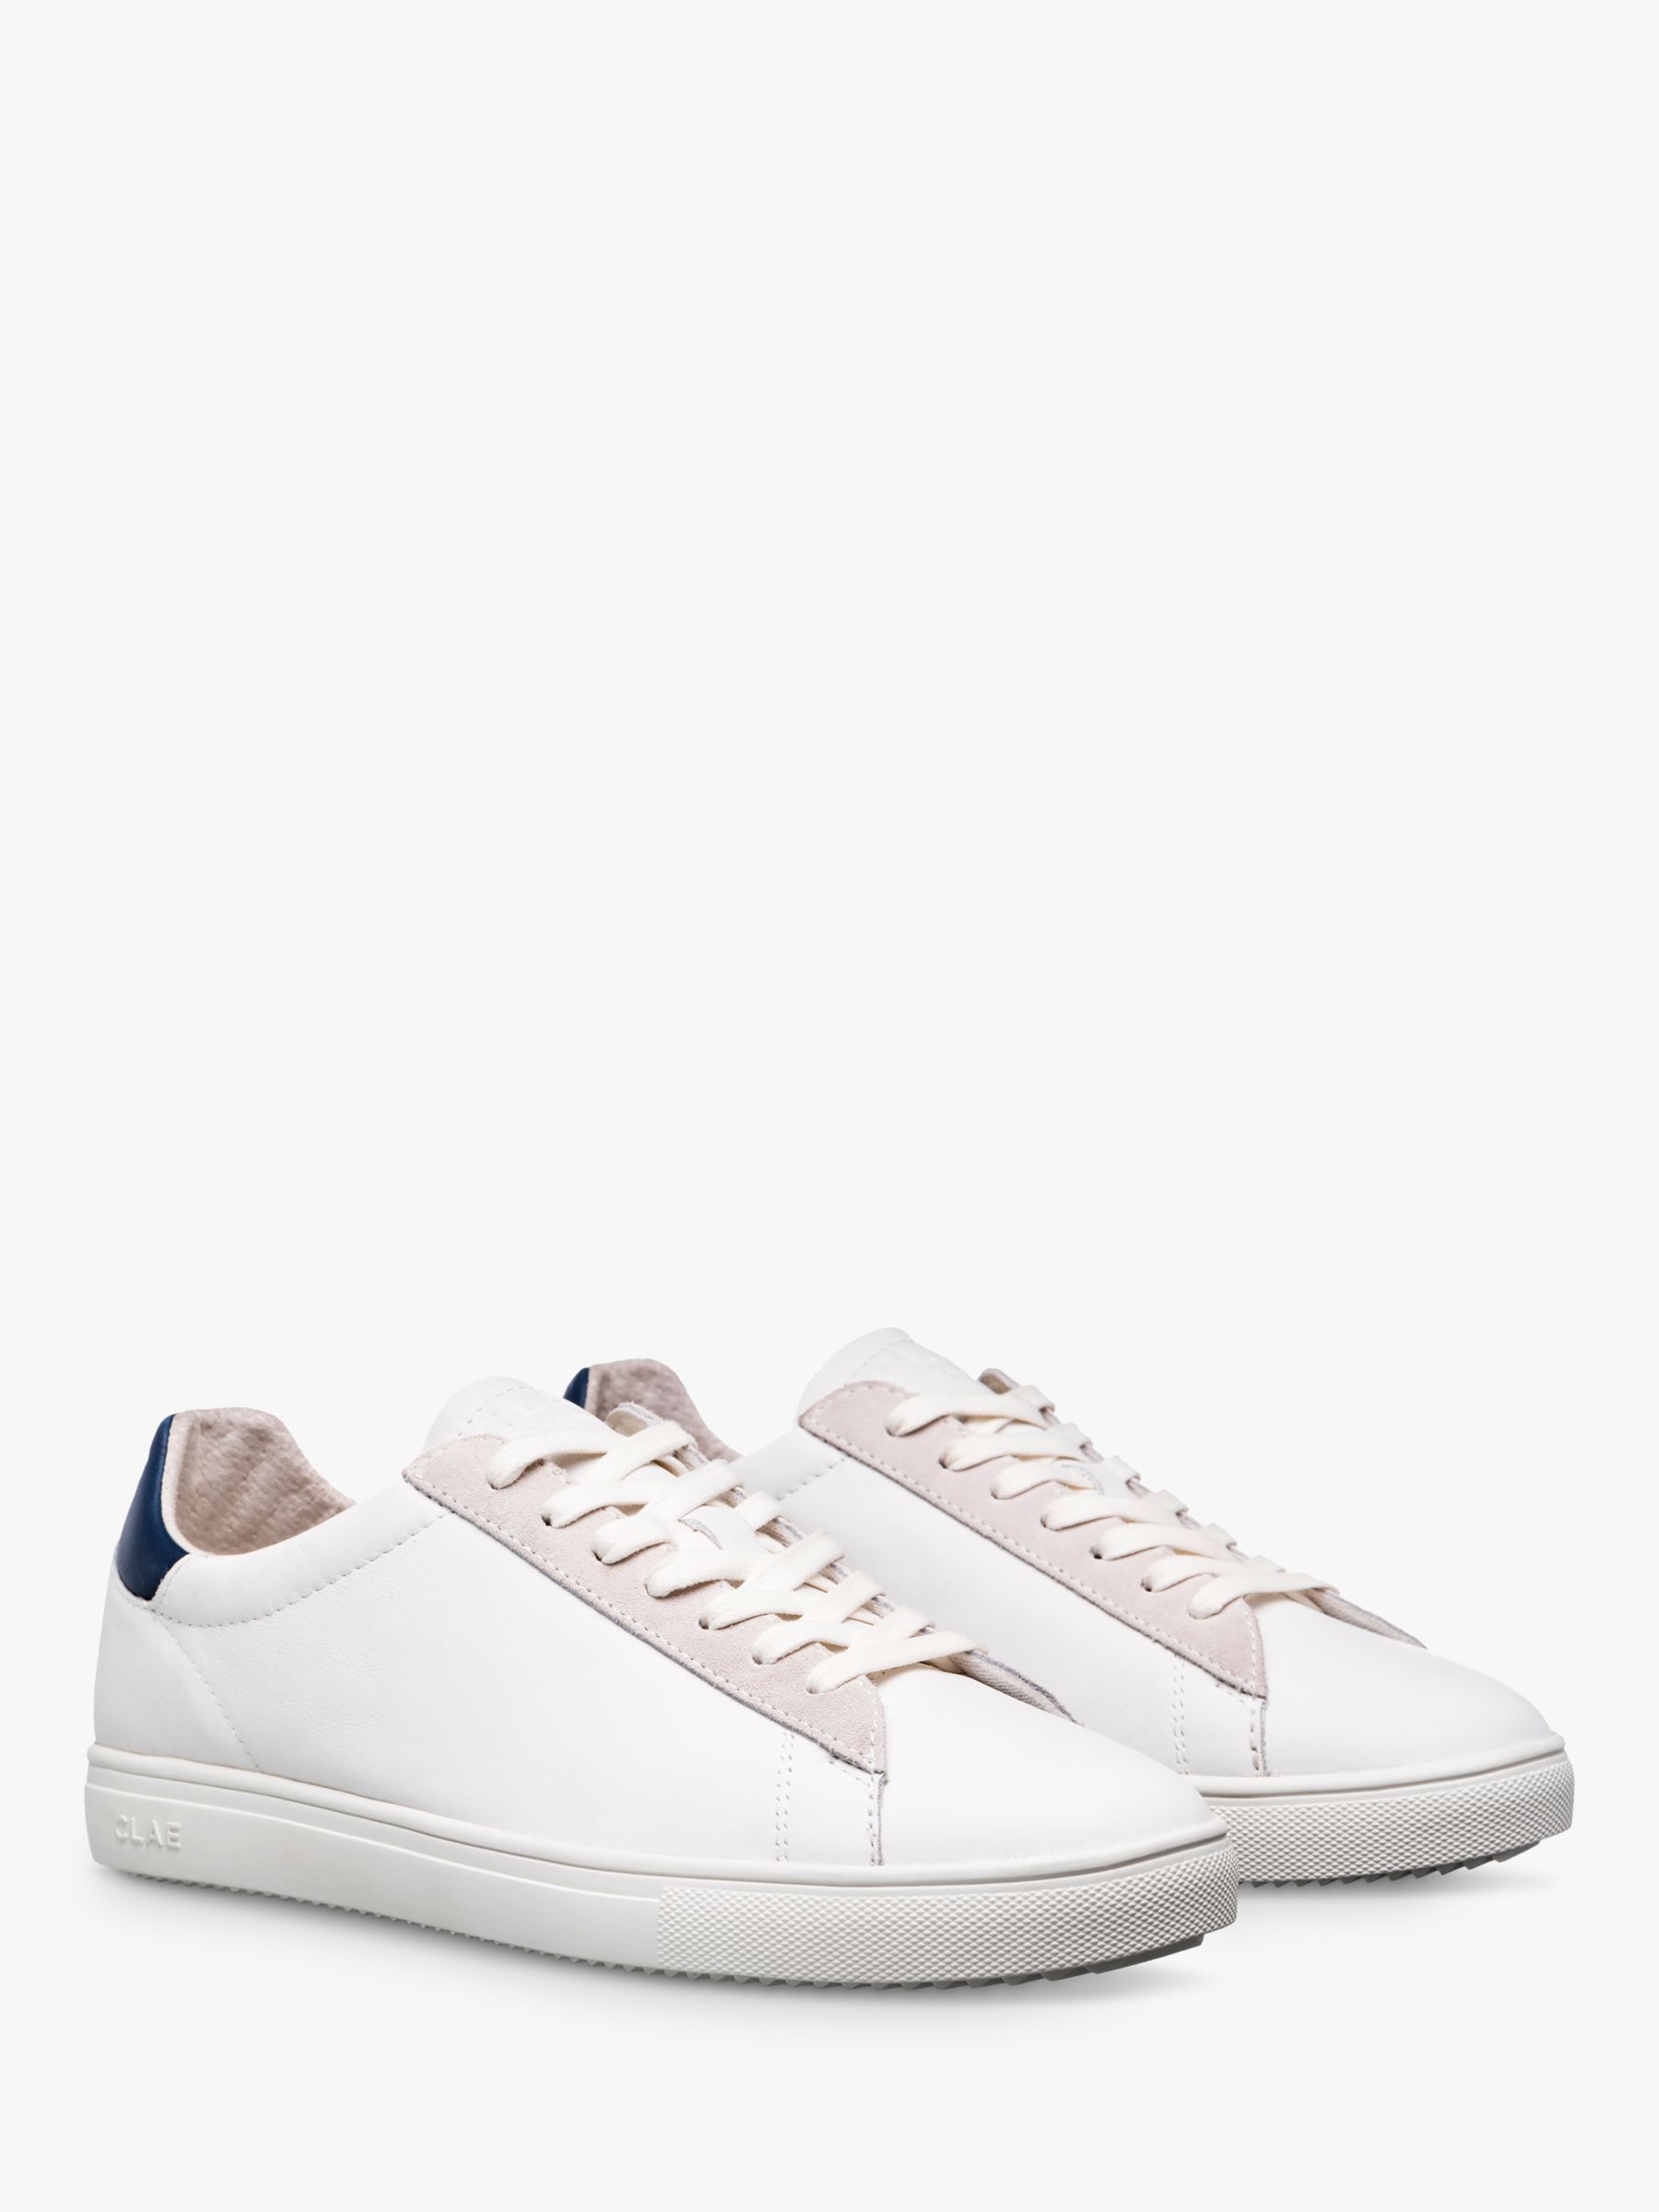 Buy CLAE Bradley Leather Lace Up Trainers Online at johnlewis.com